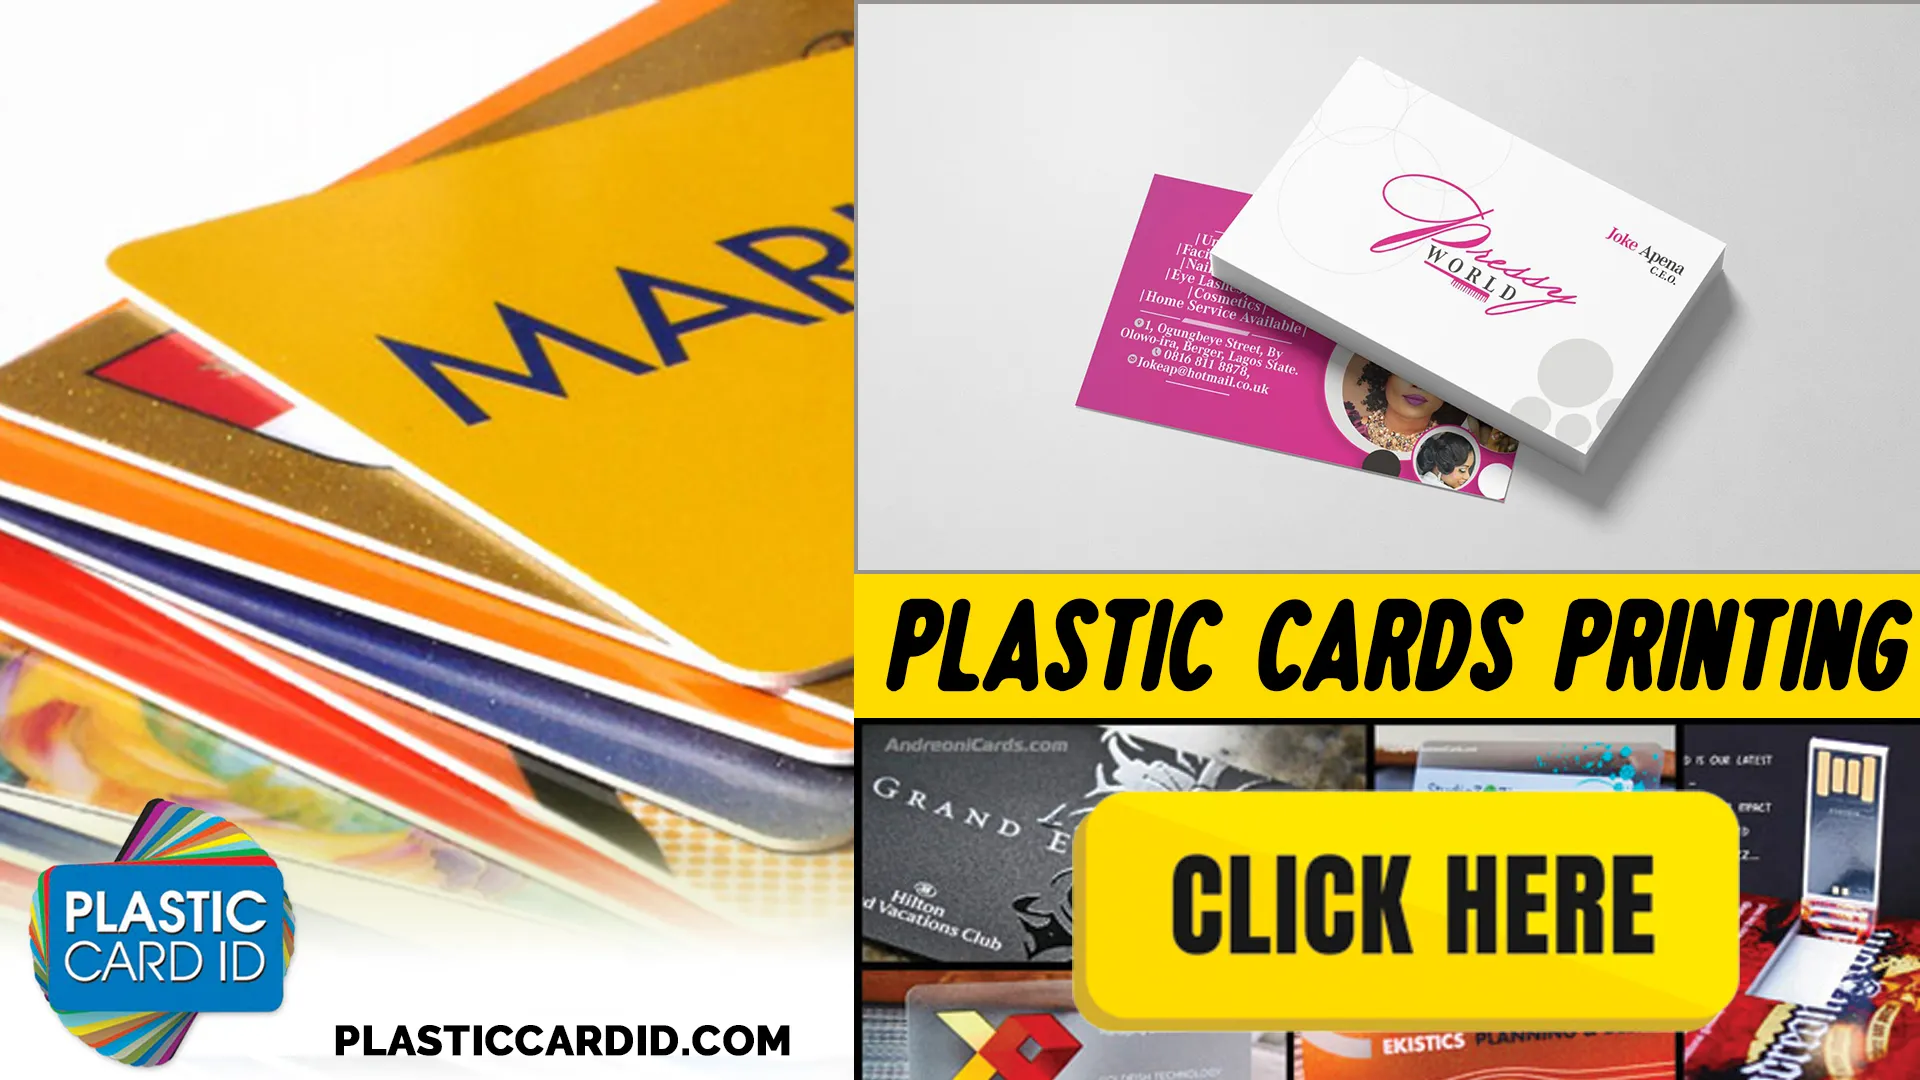 The Green Side of Card Printing with Plastic Card ID
